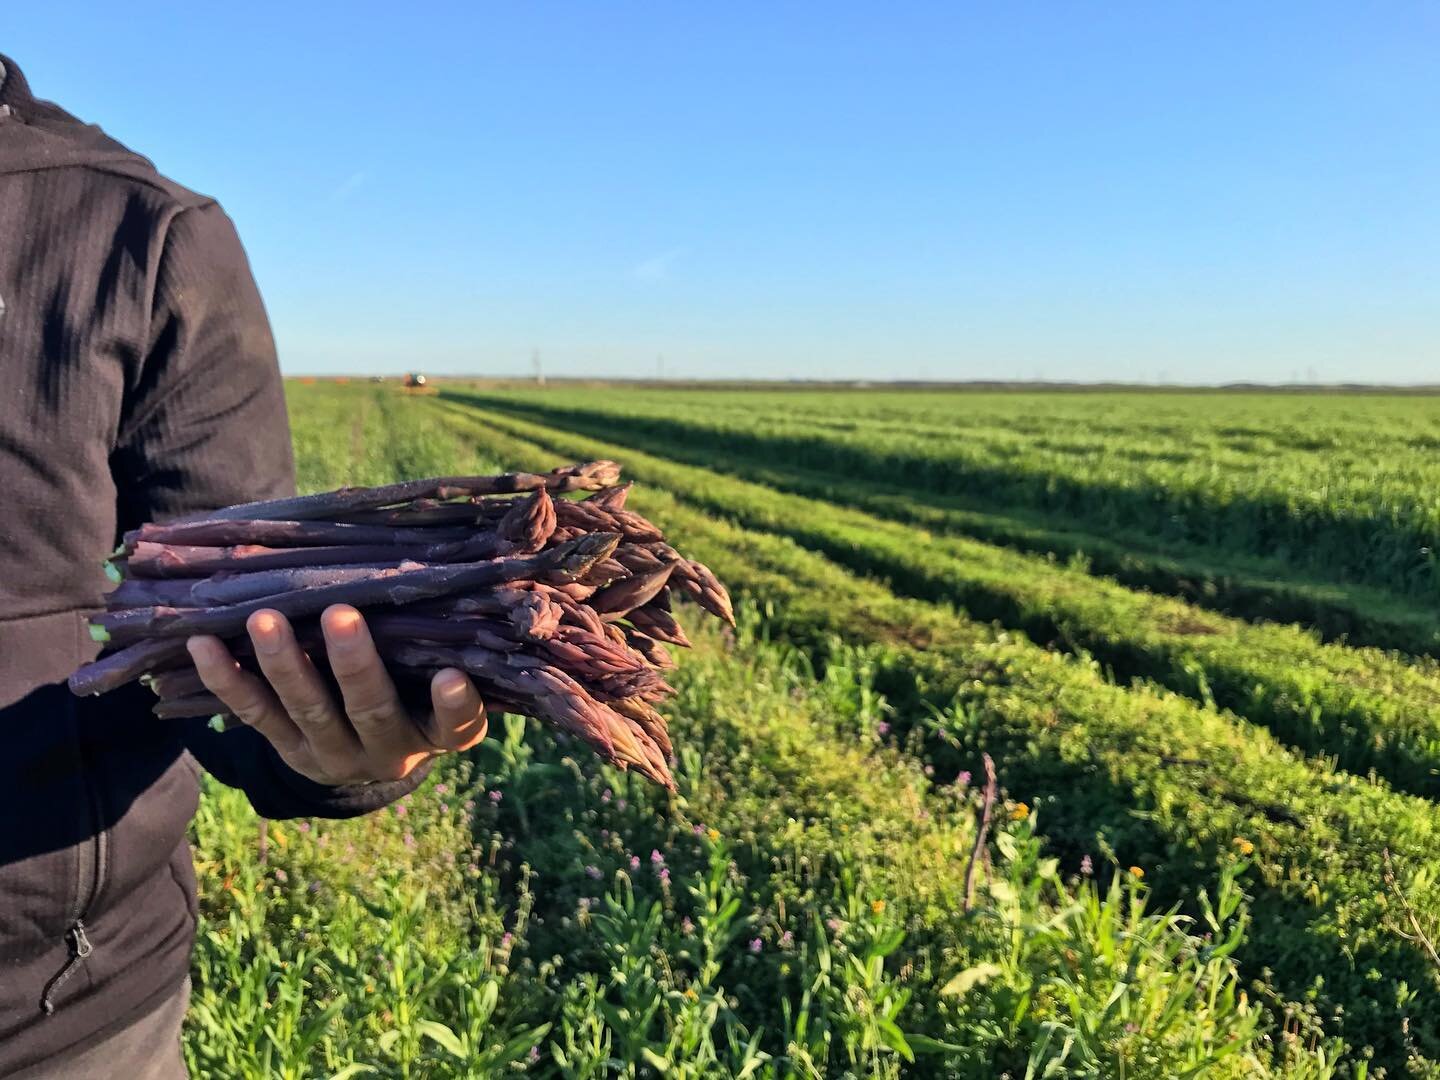 Purple asparagus! 
🌞🌱🚜
We were able to squeeze in some field work earlier this week before more rain came in and one of the tasks at hand was to tackle the weeds in the asparagus fields. The asparagus starts popping out of the soil around this tim